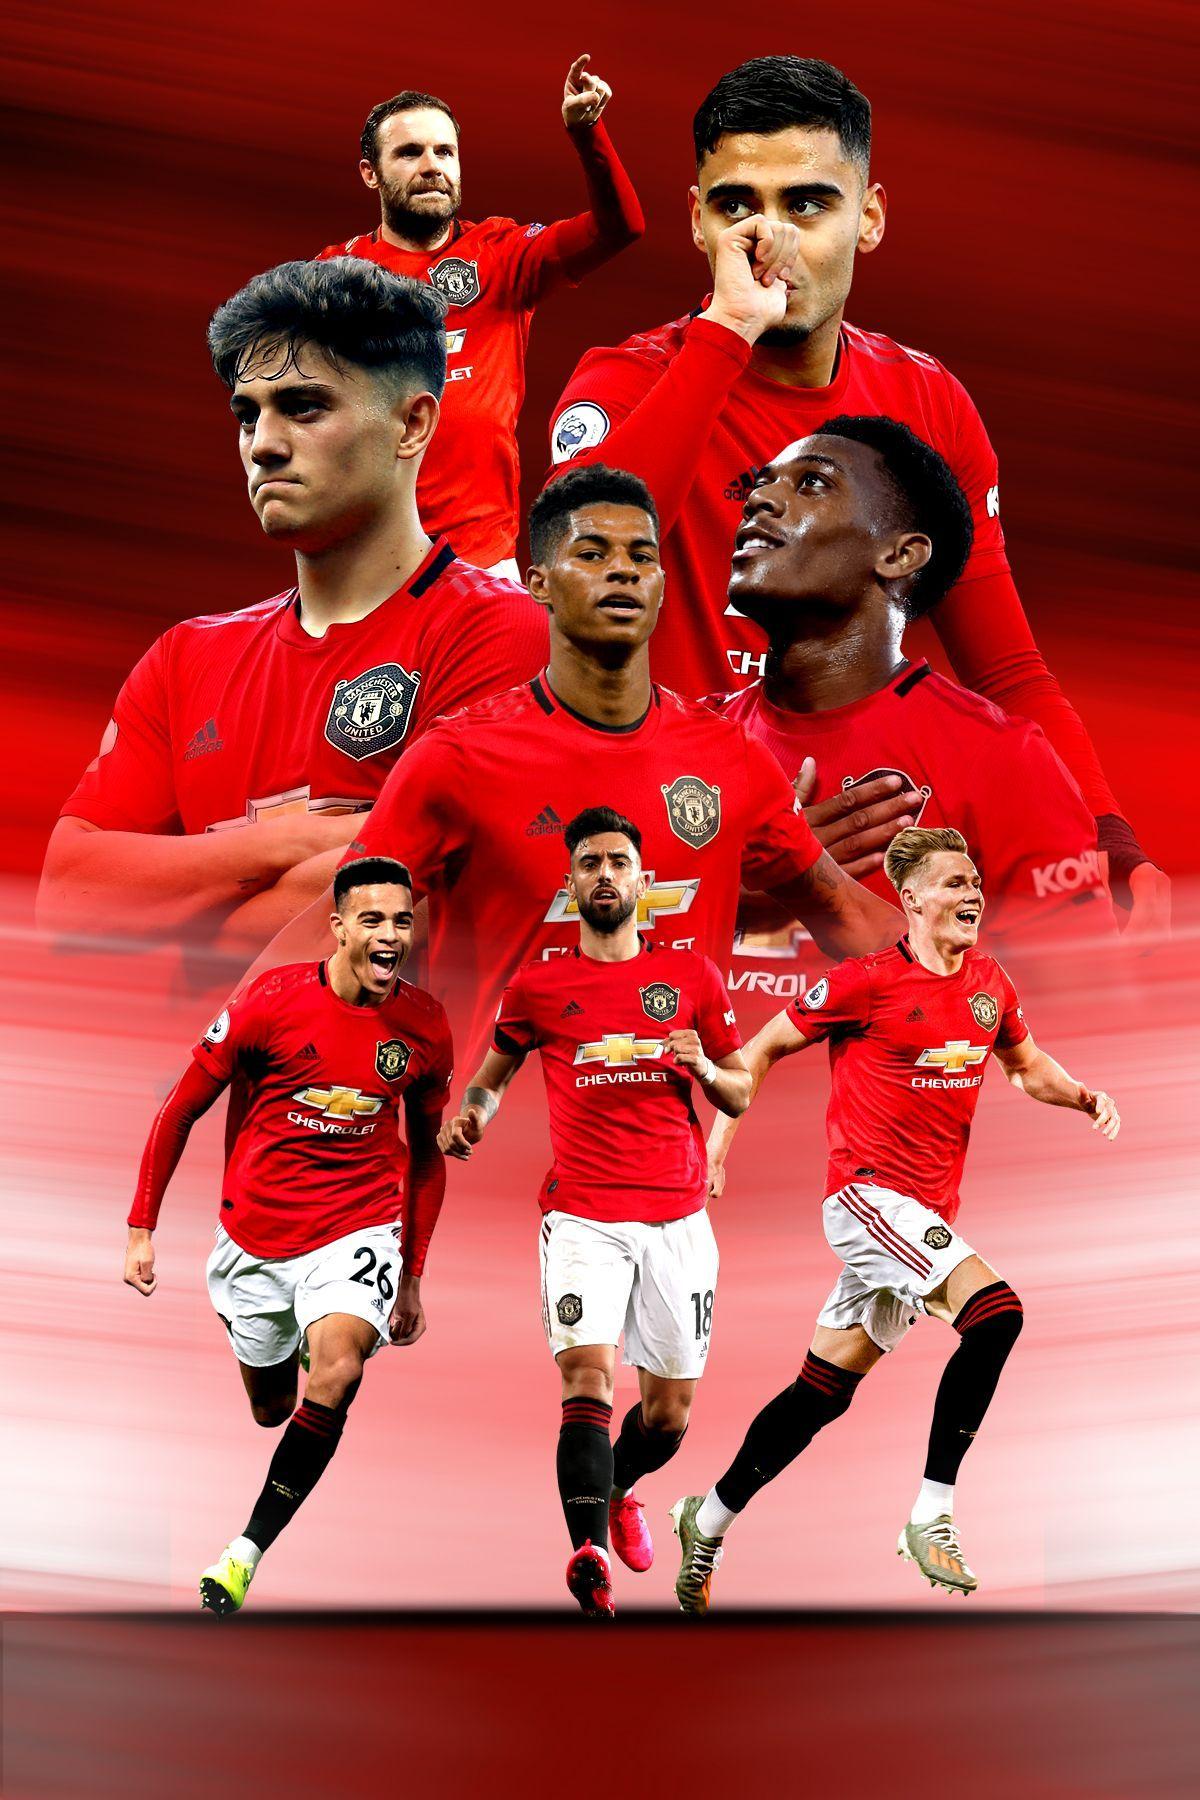 Manchester United Players Wallpapers Top Free Manchester United